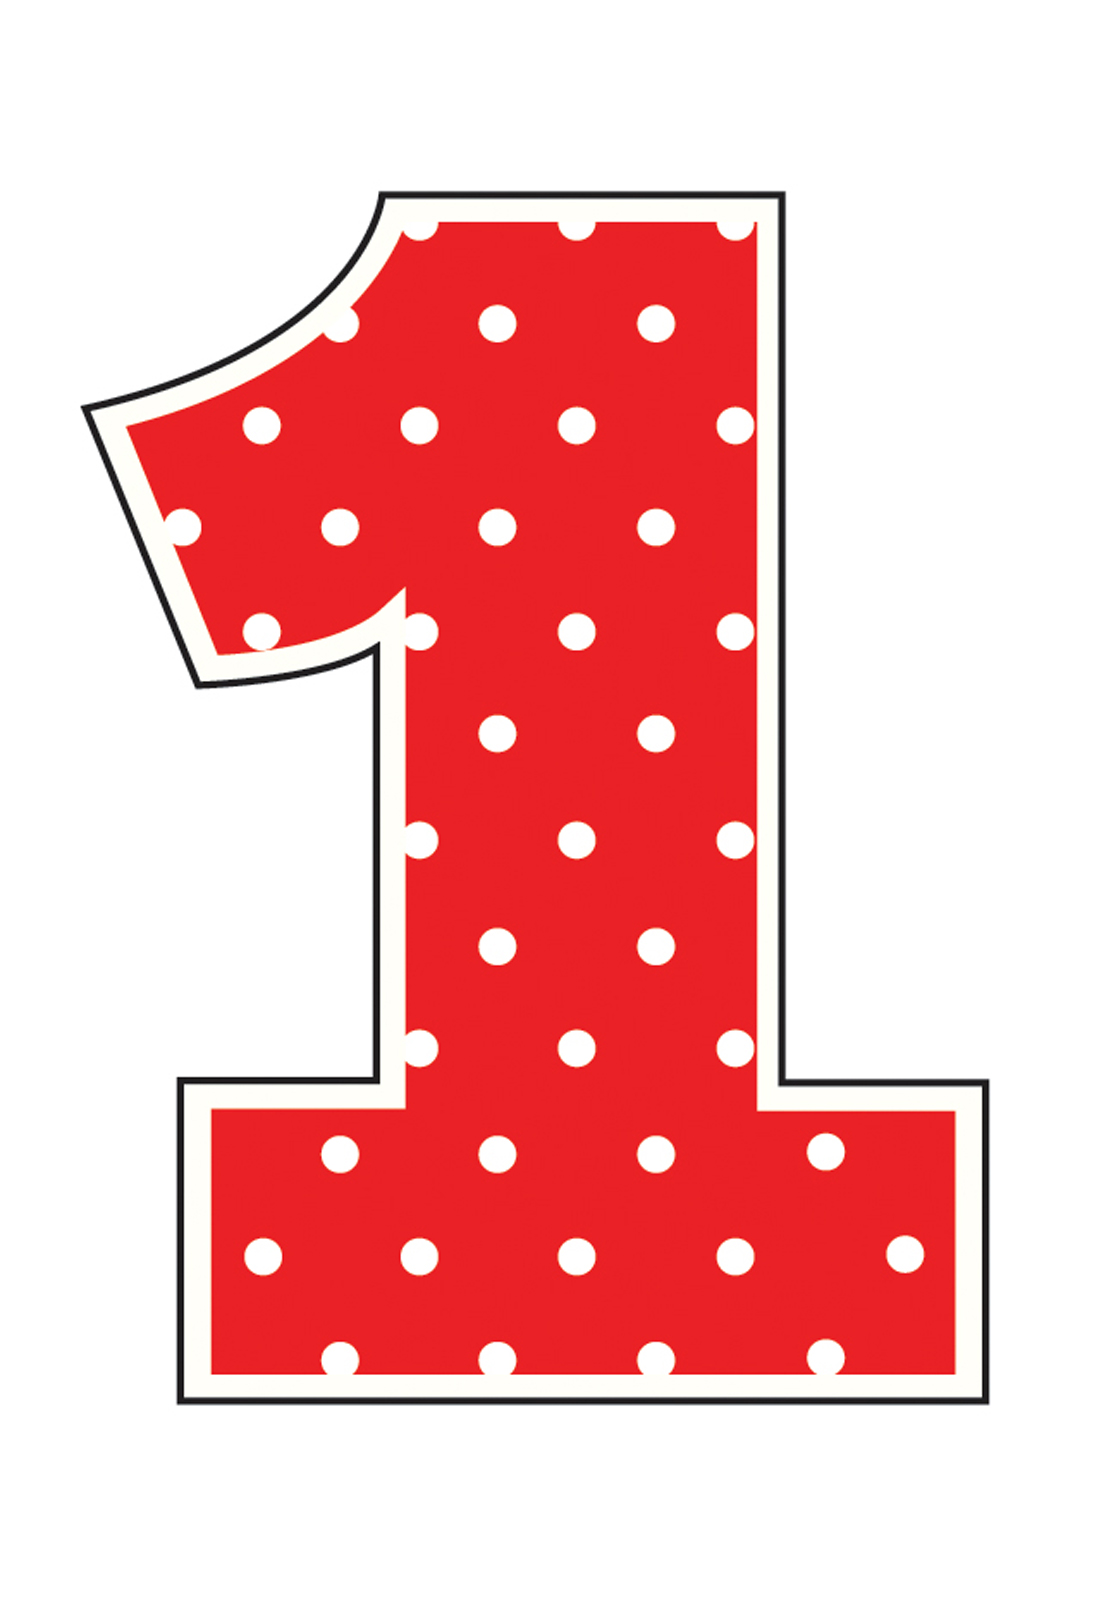 Big Polka Dot Clipart Of The Number 1 Clipground